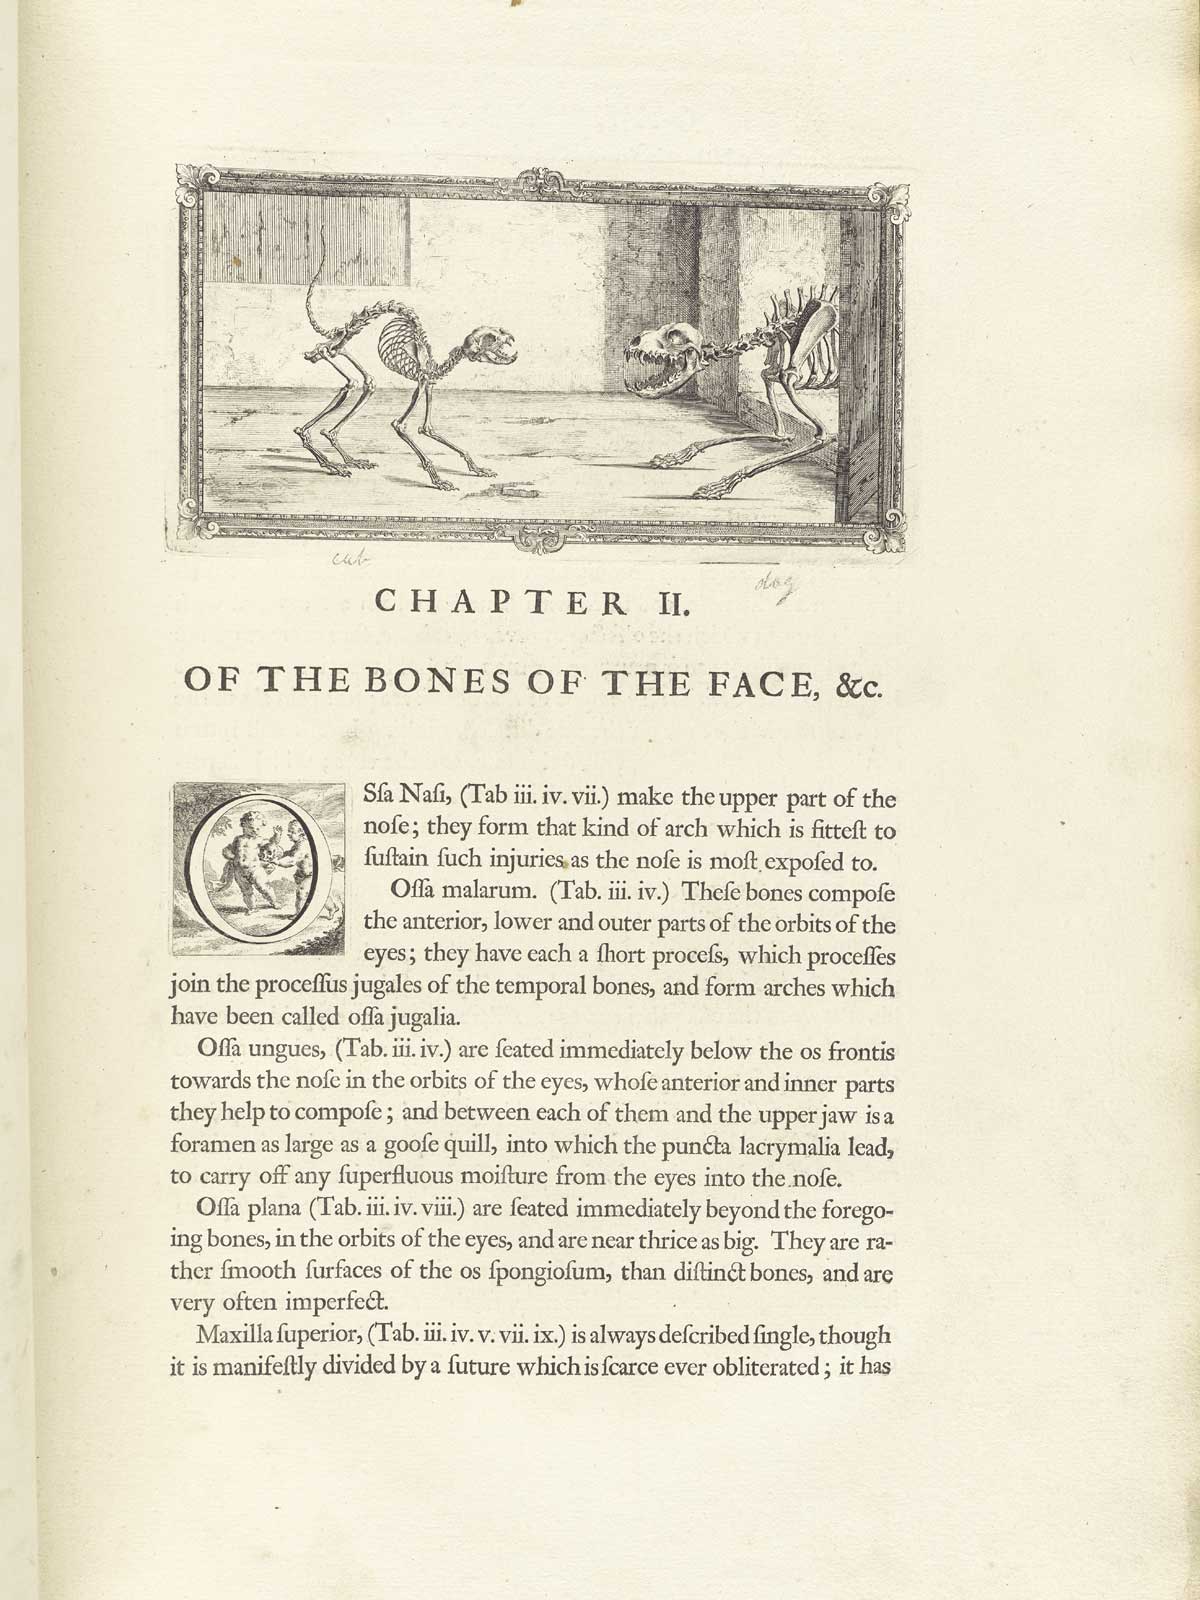 Typeset page of text with large engraved vignette at the top of the page showing the skeletons of a cat and dog hissing at each other, with the cat on the left and the dog on the right and mostly cut off the edge; from William Cheselden’s Osteographia, NLM Call no.: WZ 260 C499o 1733.